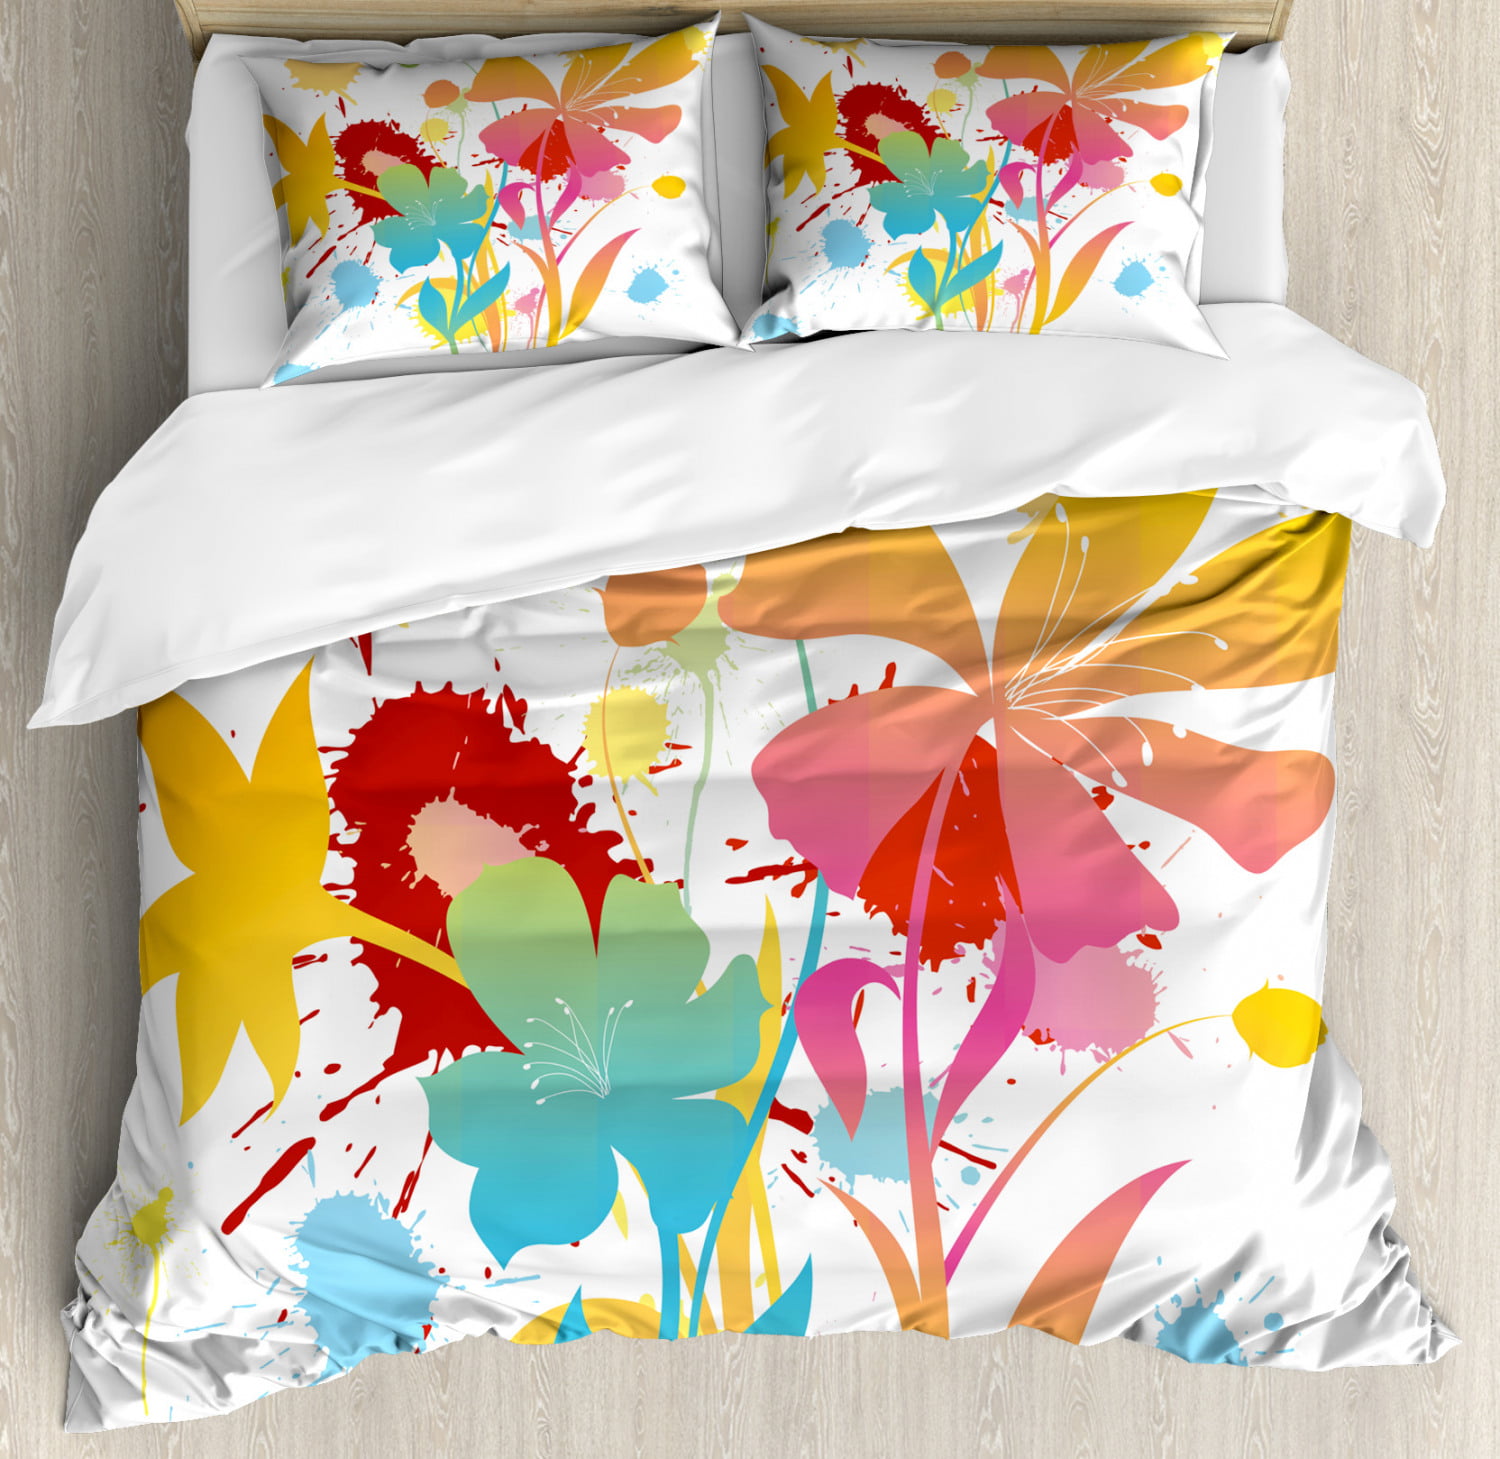 Colorful Duvet Cover Set King Size, Beachy Duvet Covers King Size